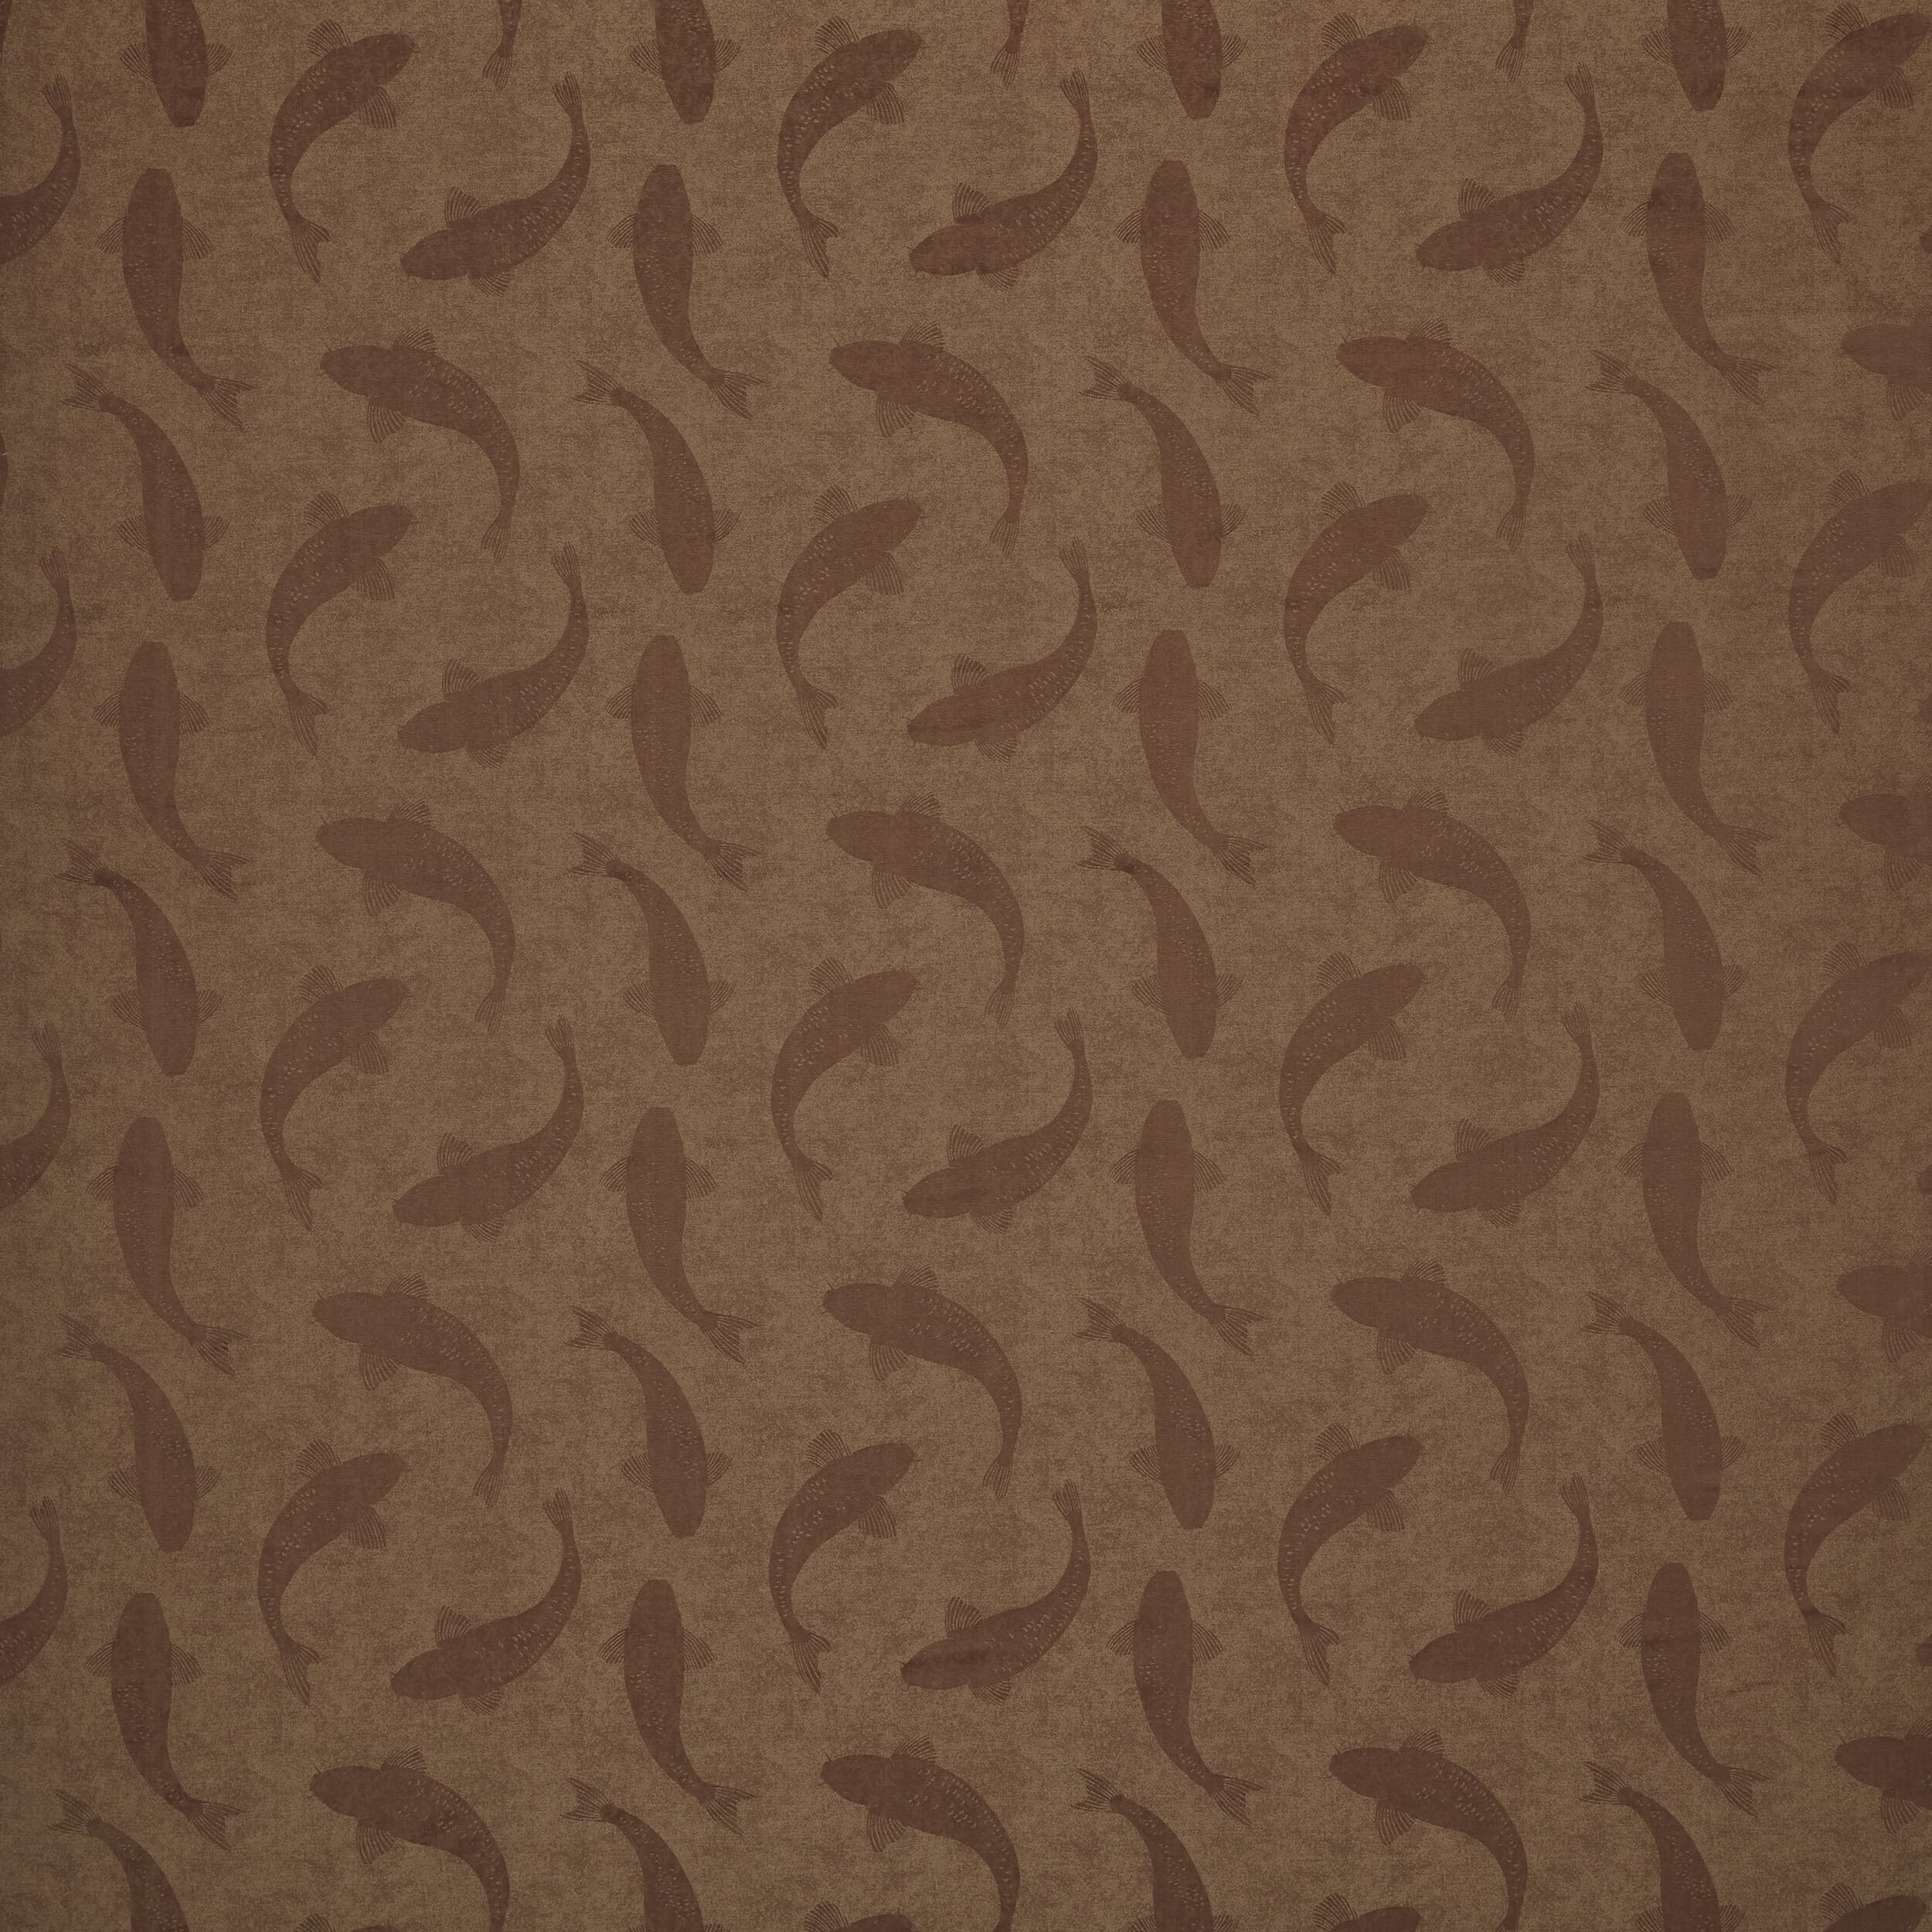 Eakins 1 Henna by Stout Fabric